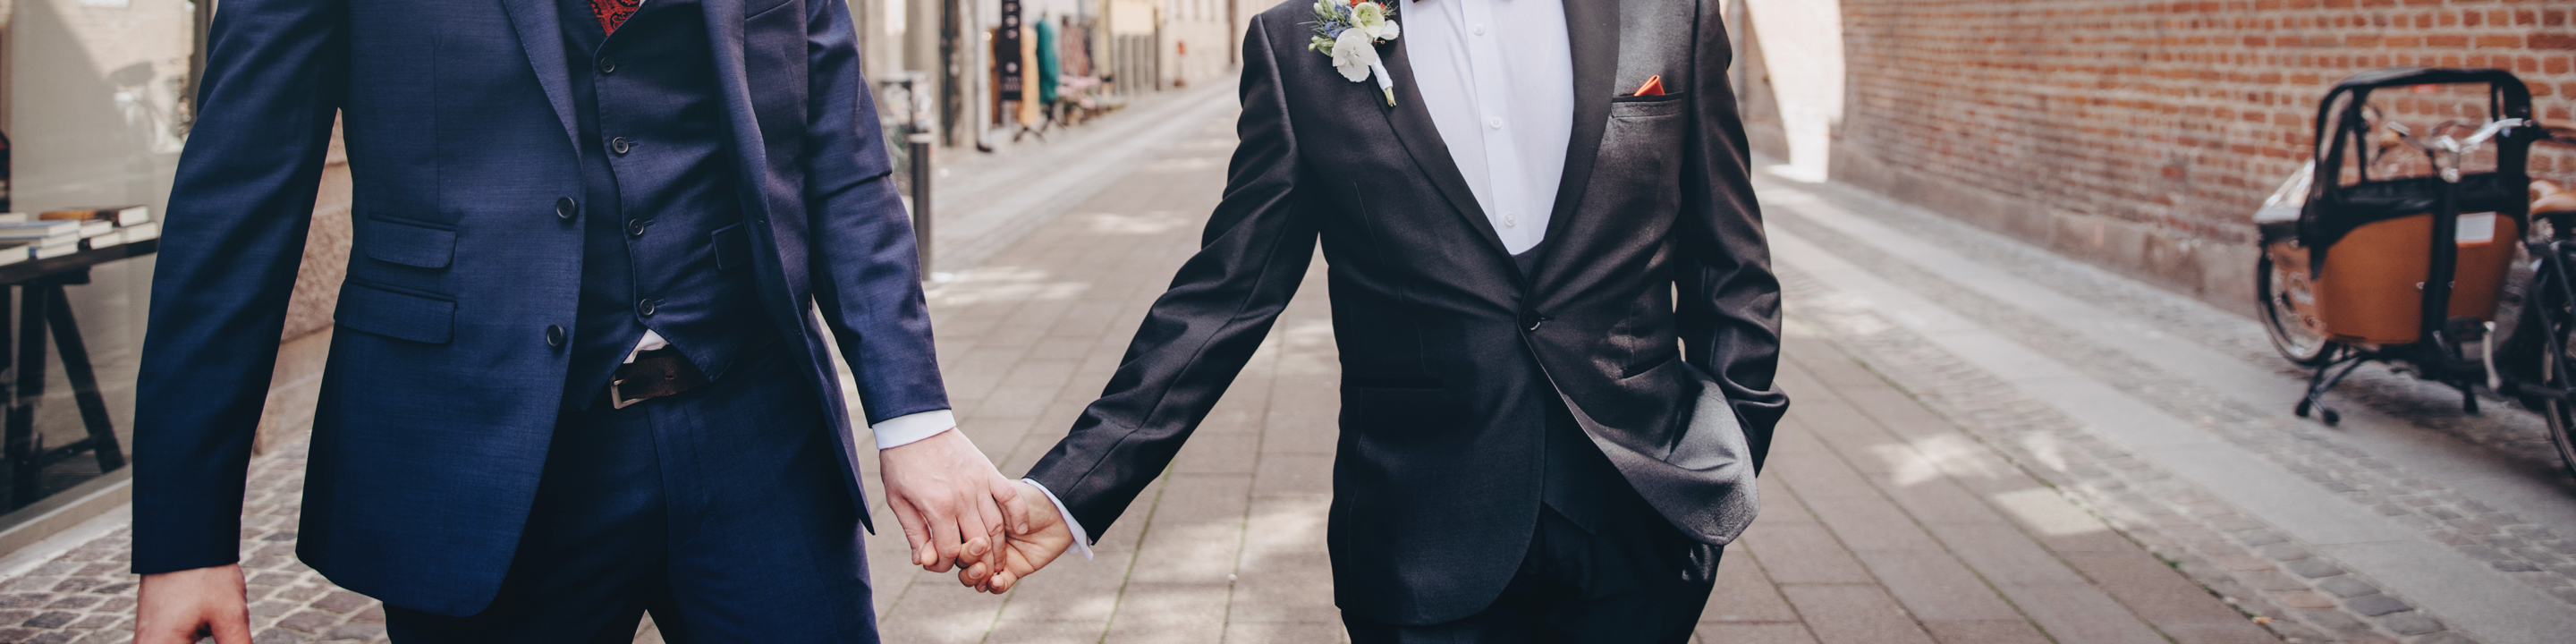 The Impact of Marriage Equality on Same-Sex Couples: It’s Not Just an Income Tax Issue